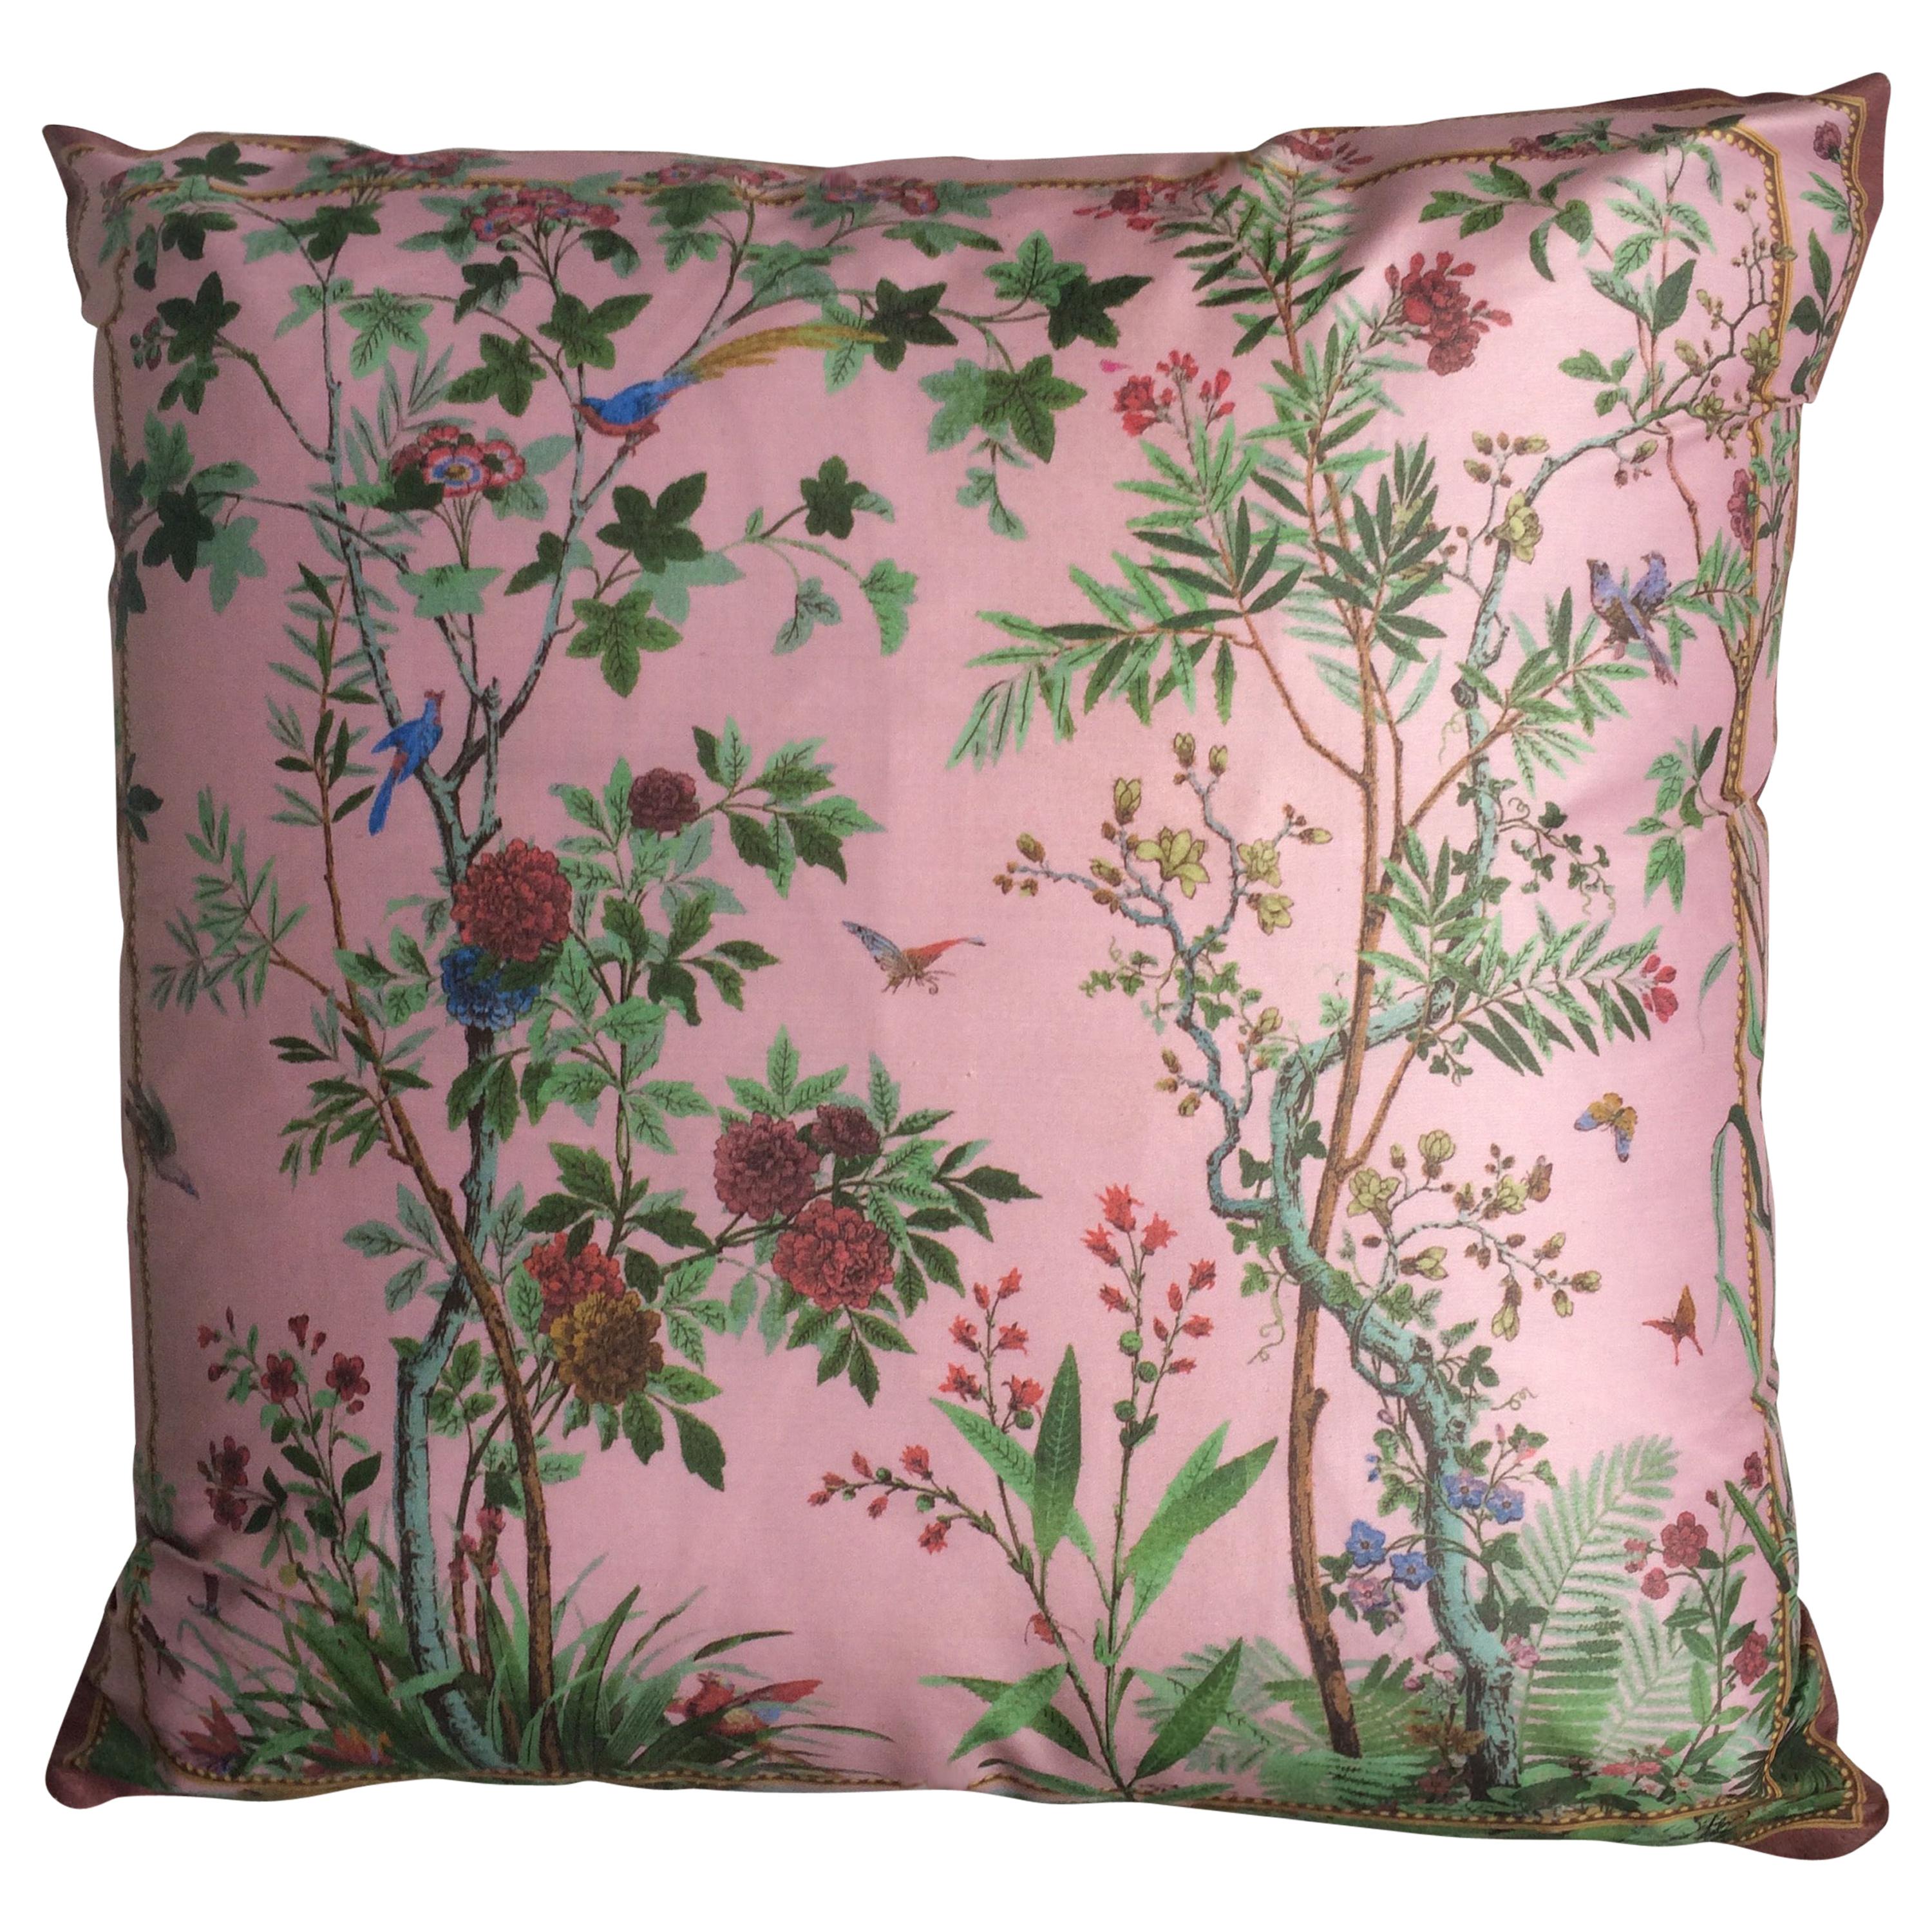 "Decor Chinois" Silk Throw Pillow in Pink by Zuber For Sale